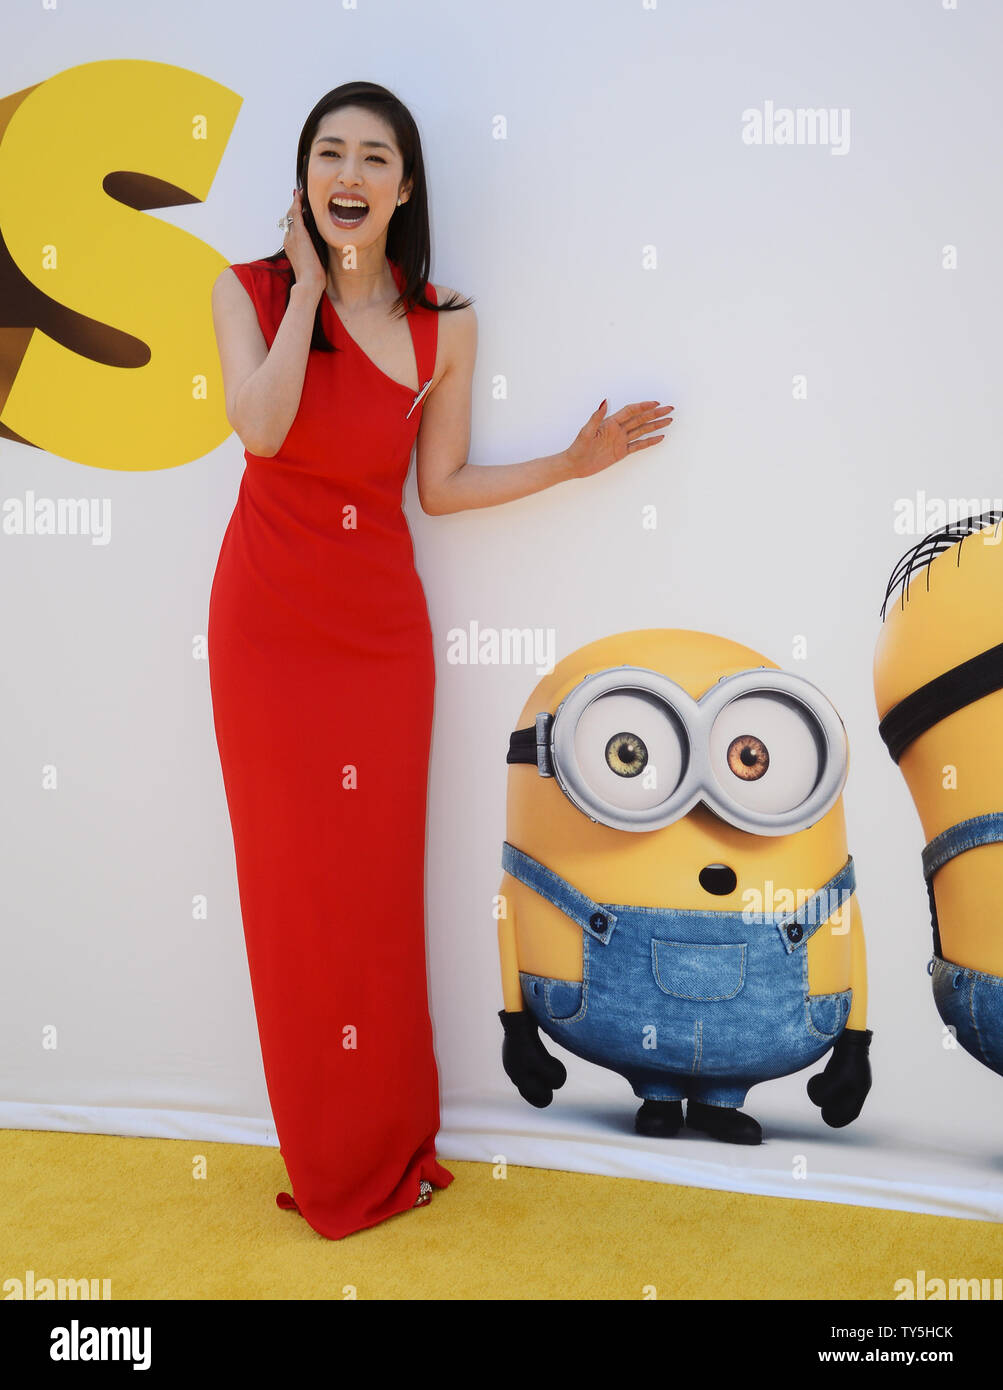 Actress Yuki Amami attends the premiere of the  animated motion picture comedy 'Minions' at the Shrine Auditorium in Los Angeles on June 27, 2015. Storyline:  Minions Stuart, Kevin and Bob are recruited by Scarlet Overkill (Sandra Bullock), a super-villain who, alongside her inventor husband Herb (Jon Hamm), hatches a plot to take over the world.  Photo by Jim Ruymen/UPI Stock Photo